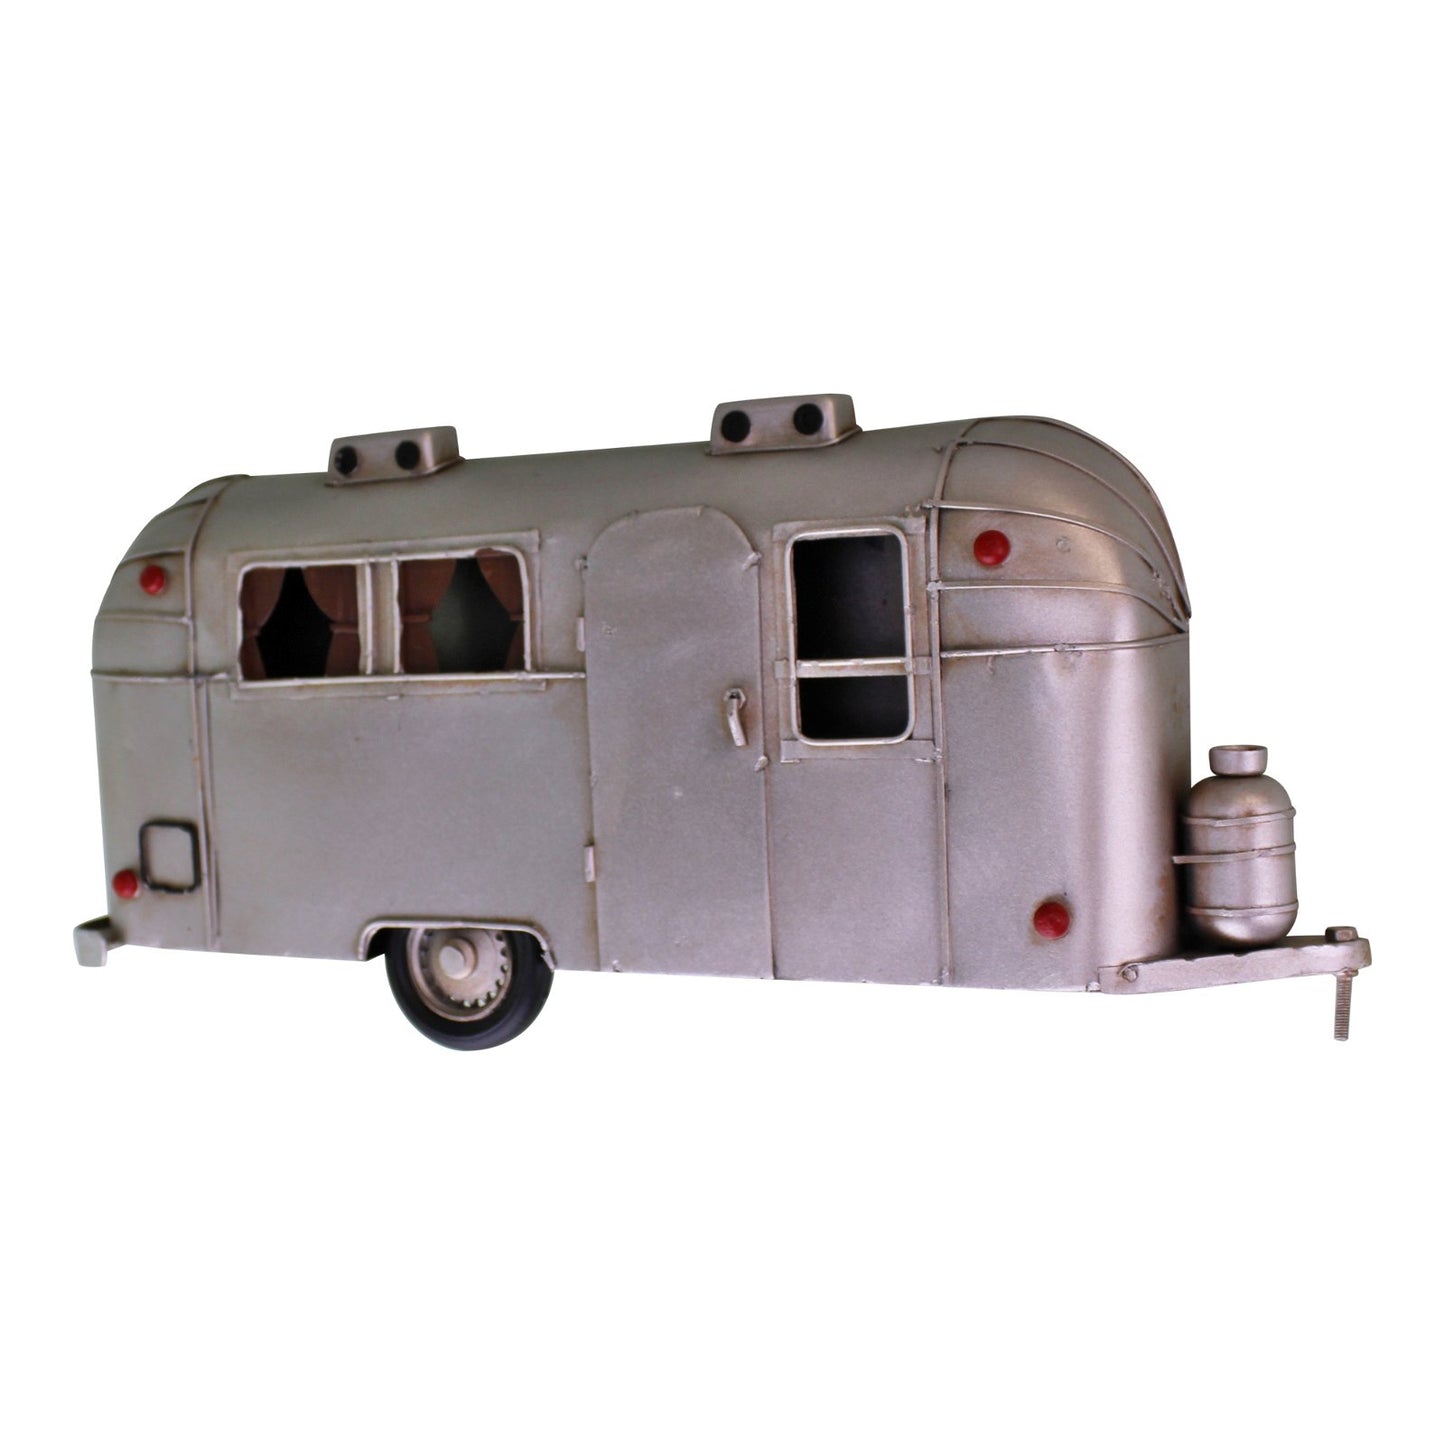 Wall Hanging Silver Metal Camper Decoration